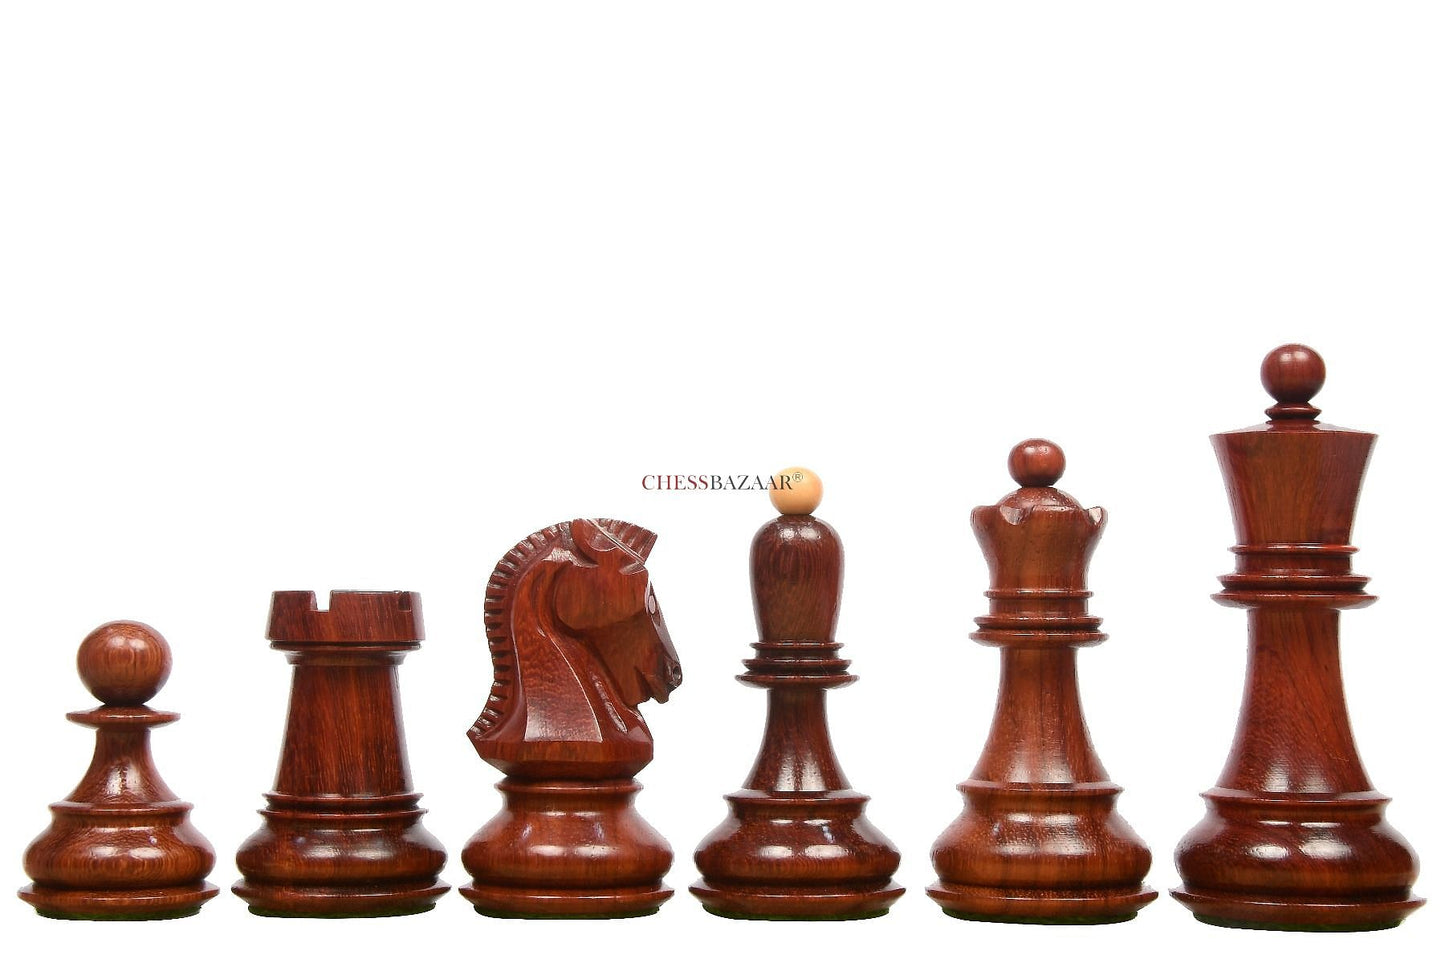 Bobby Fischer Reproduced Dubrovnik Chess Pieces from chessbazaarindia